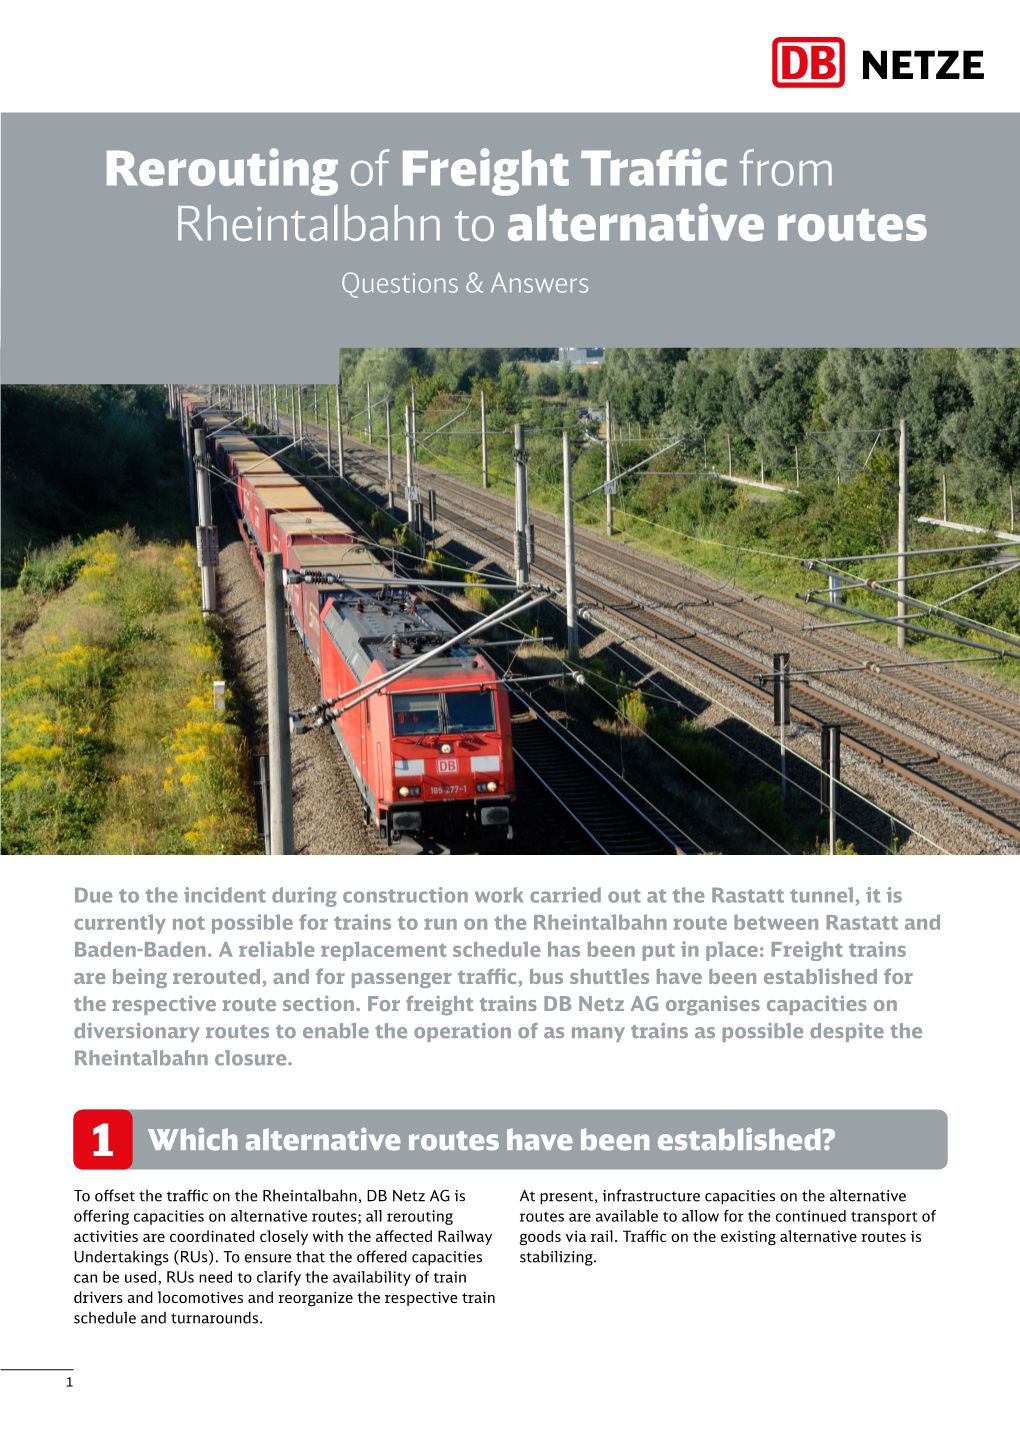 Rerouting of Freight Traffic from Rheintalbahn to Alternative Routes Questions & Answers